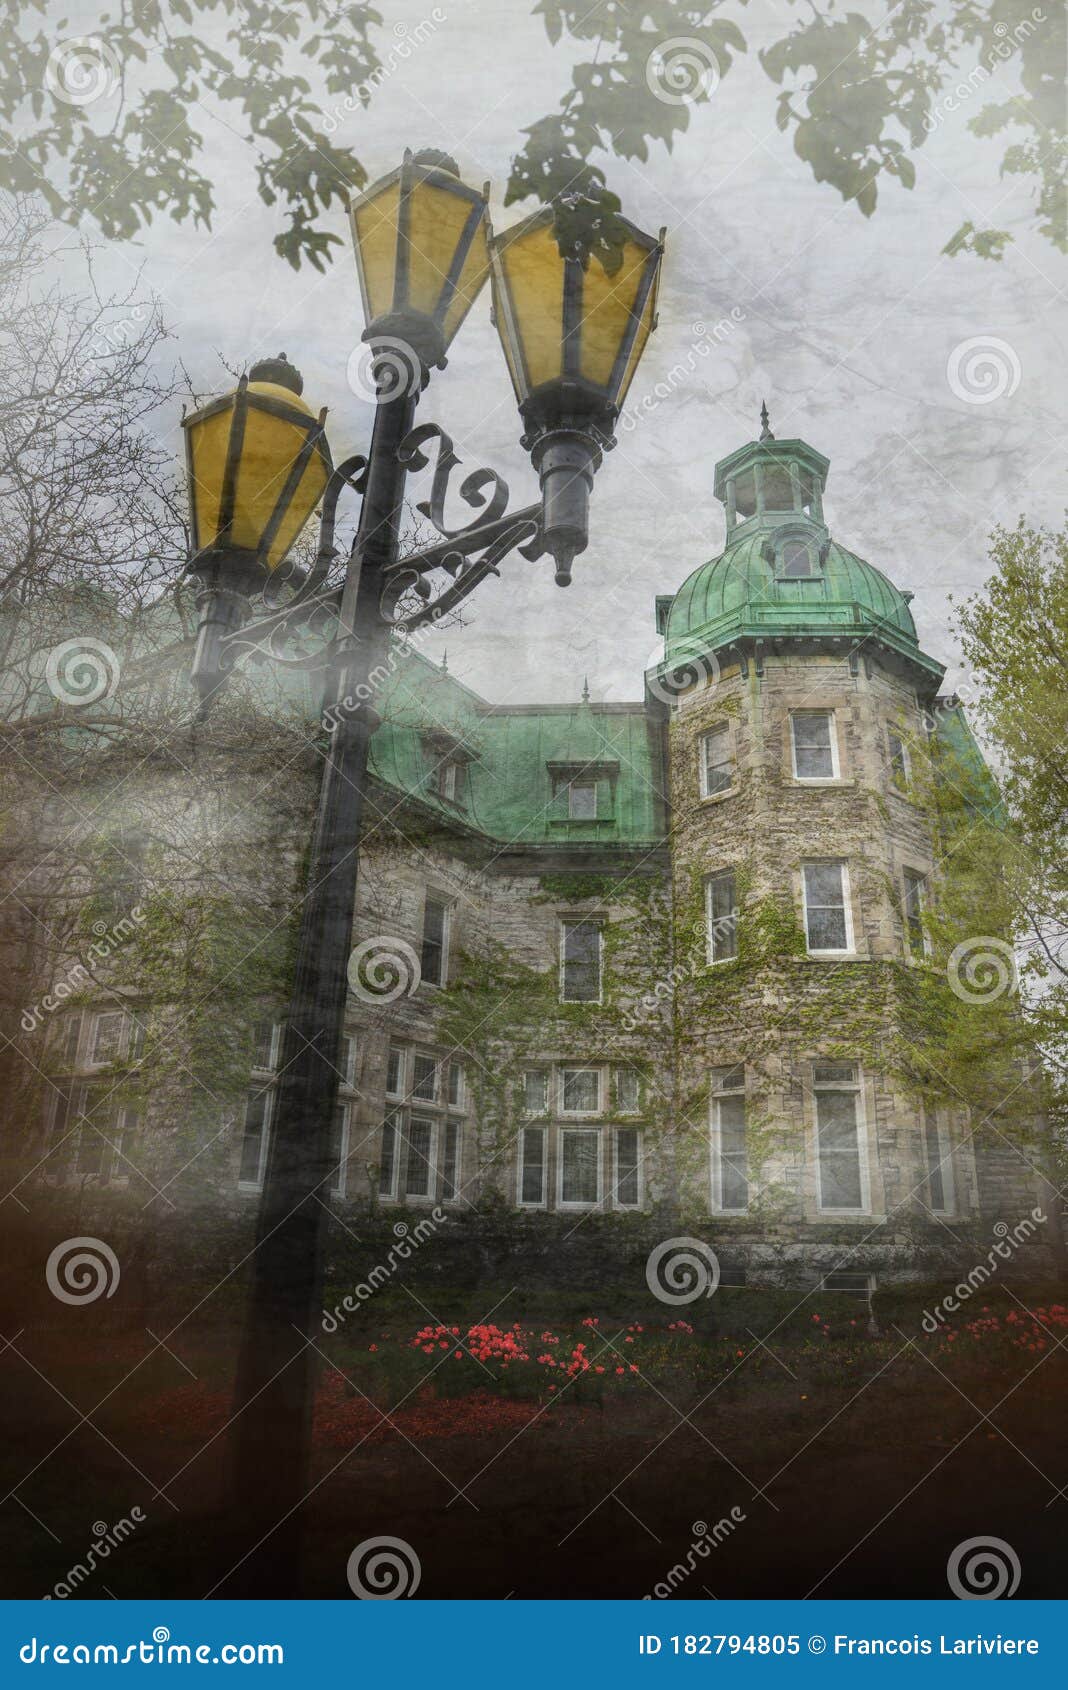 artistic view of town hall of the cyty of saint-hyacinthe quÃÂ©bec canada